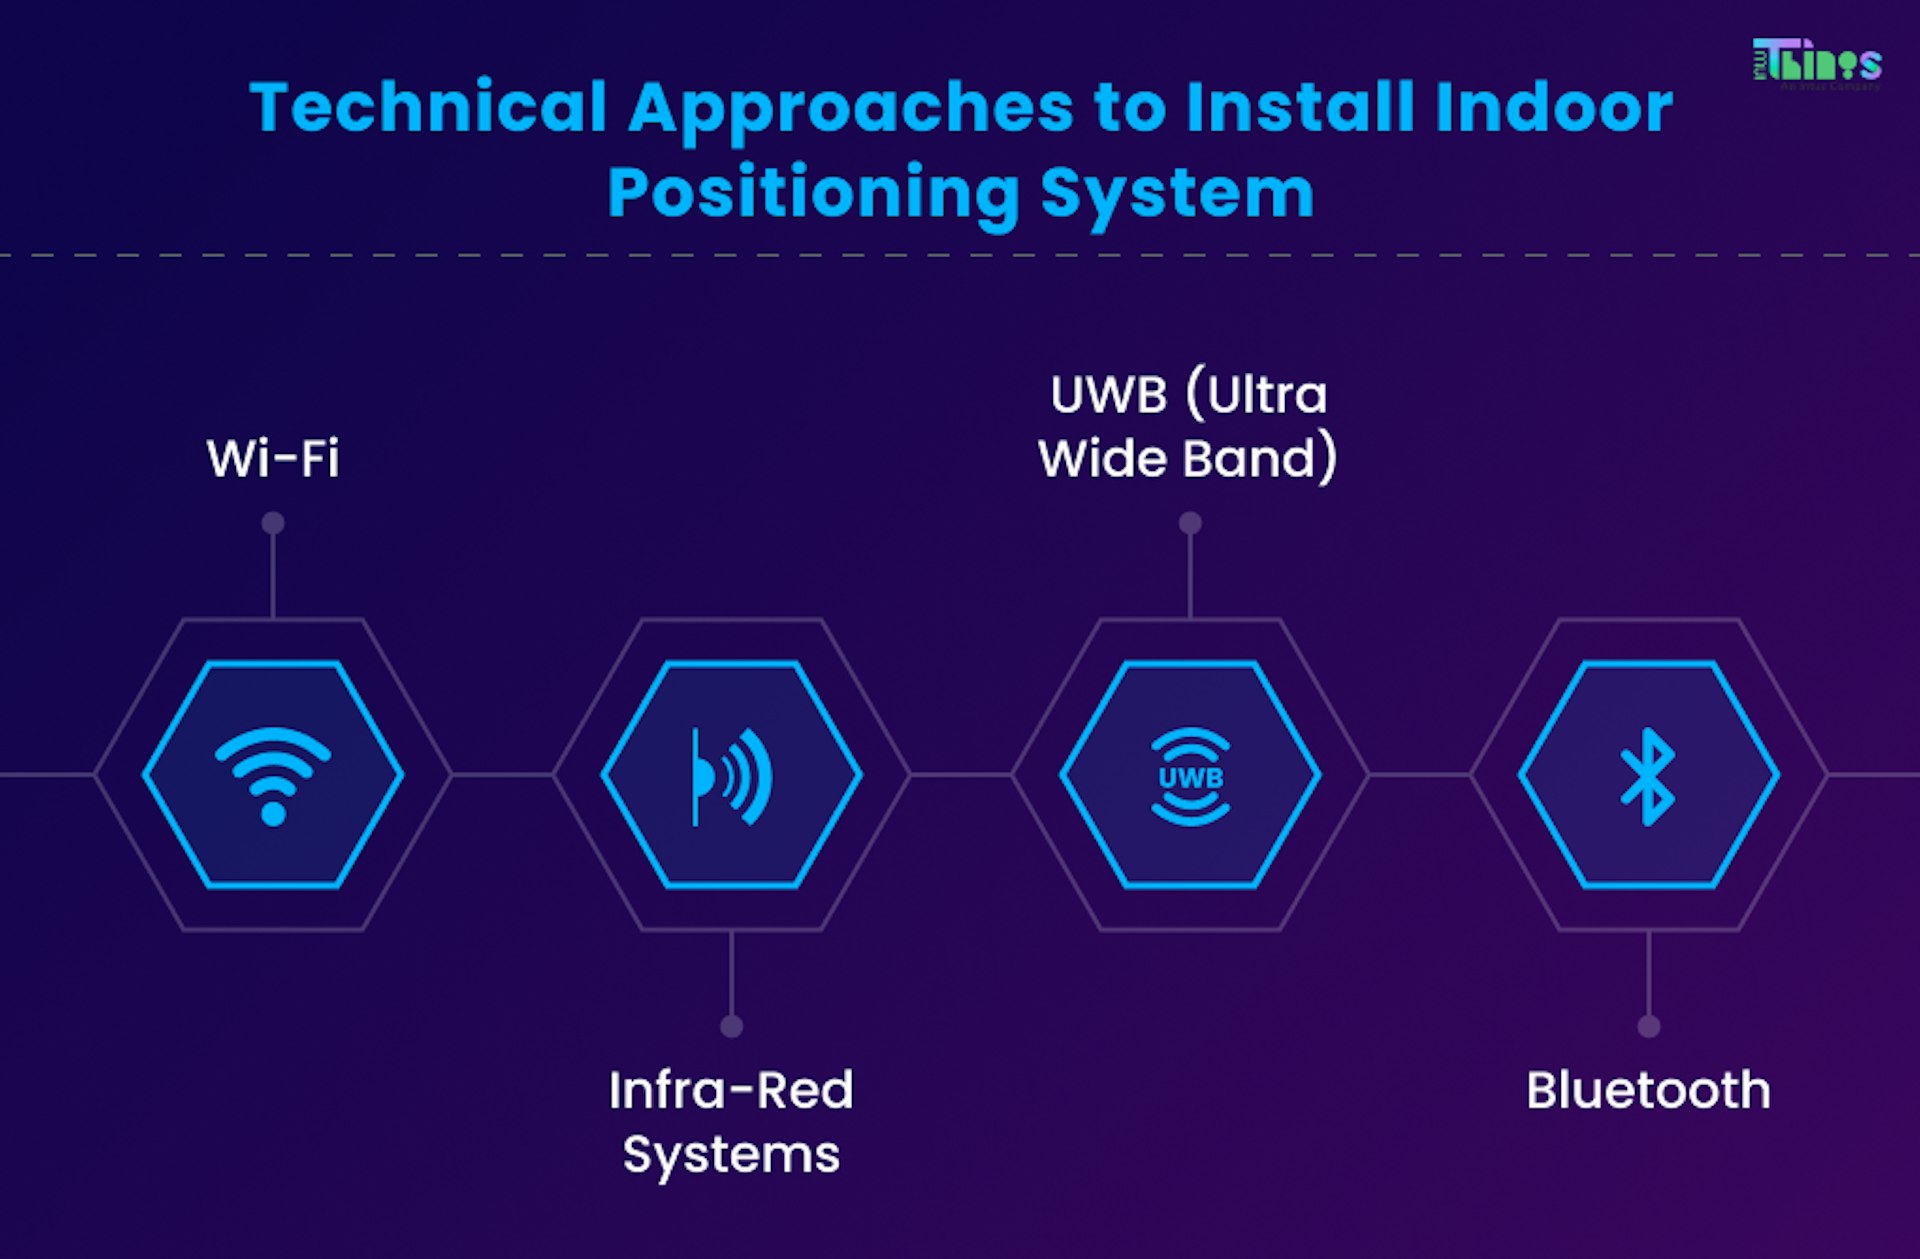 Technical approaches to install indoor positioning system